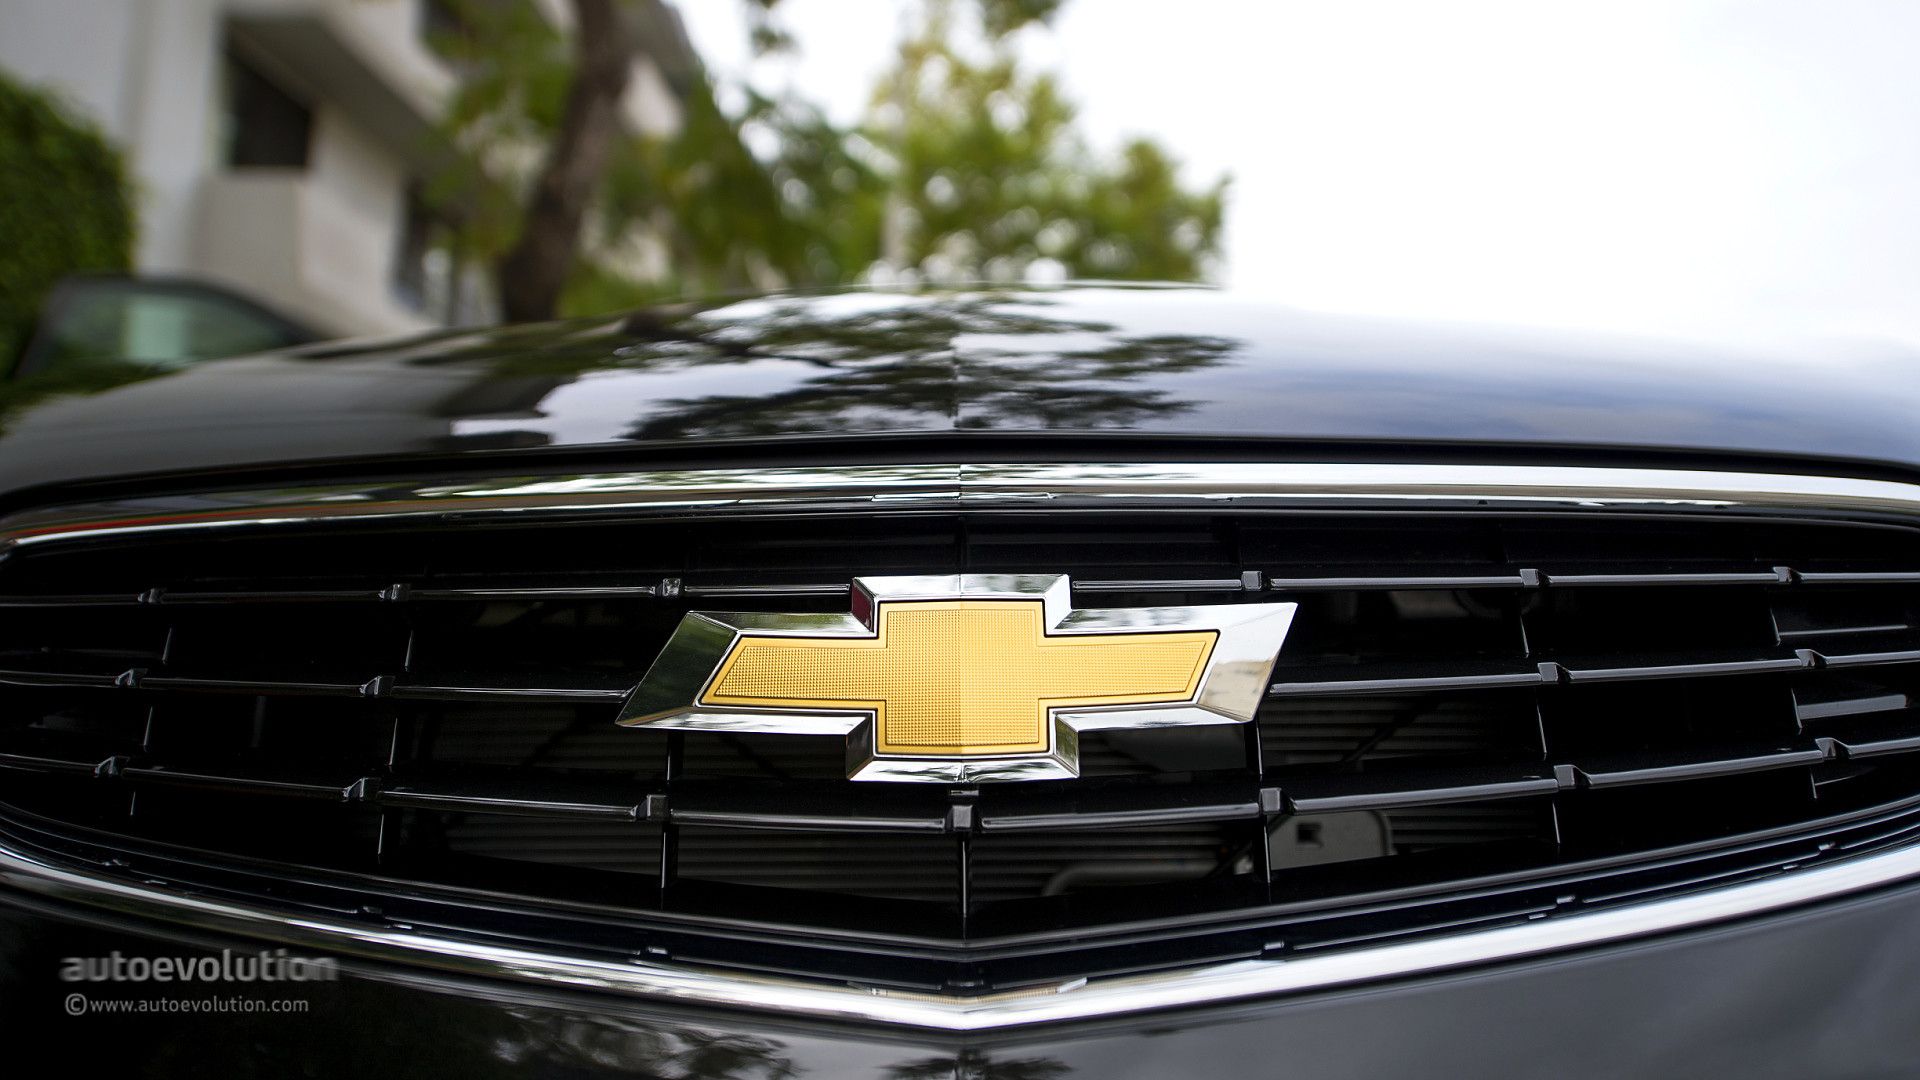 Chevy Logo Wallpaper (best Chevy Logo Wallpaper and image) on WallpaperChat